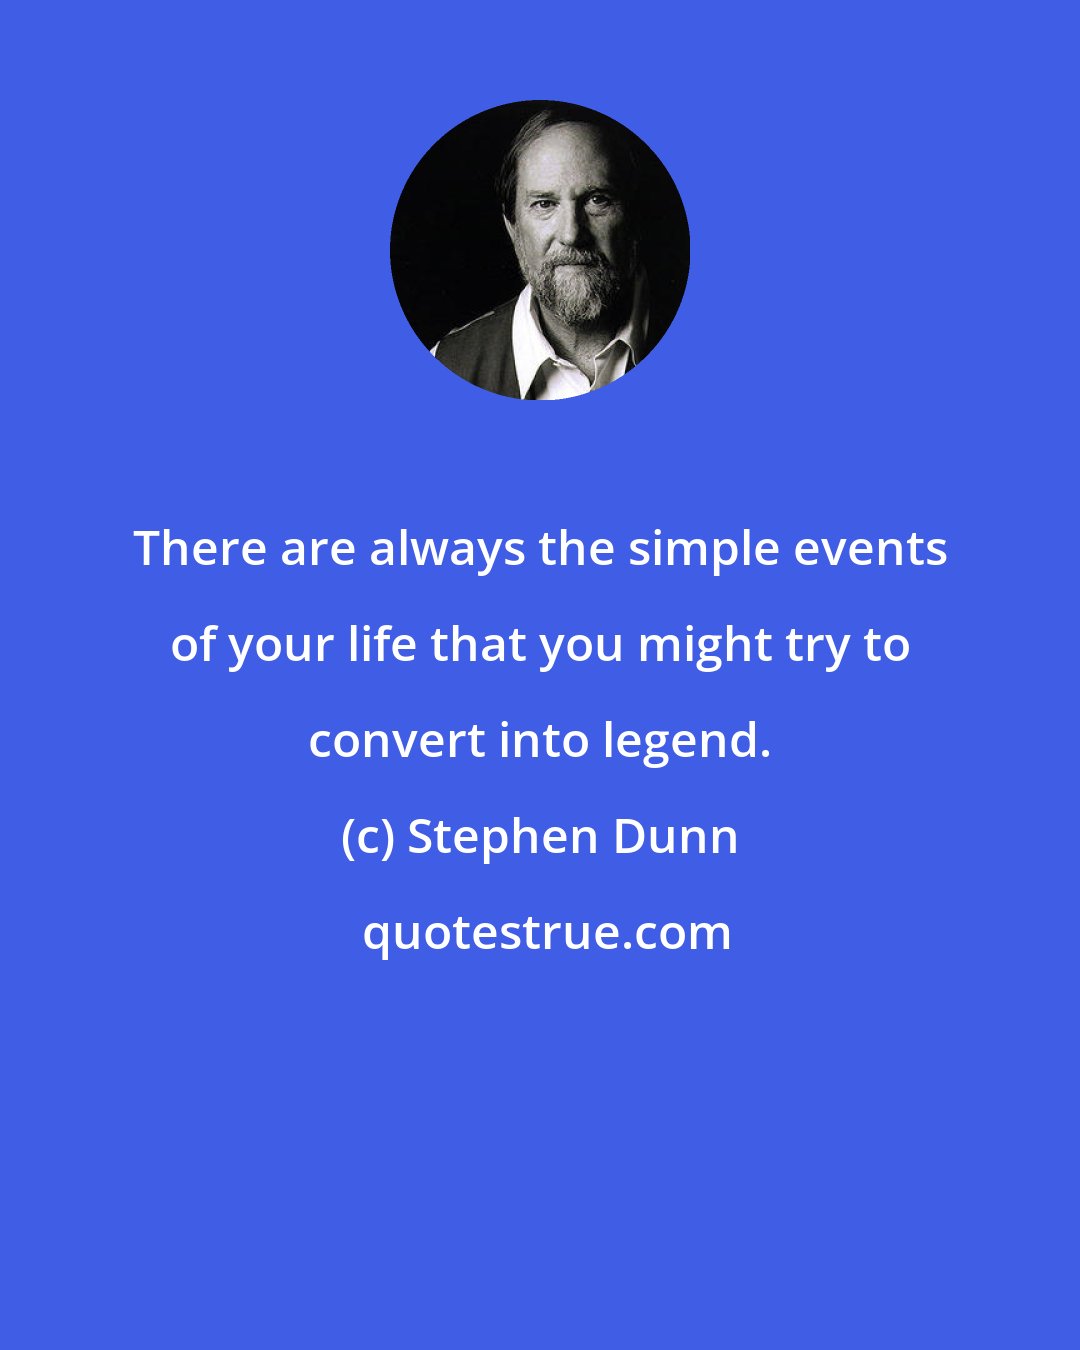 Stephen Dunn: There are always the simple events of your life that you might try to convert into legend.